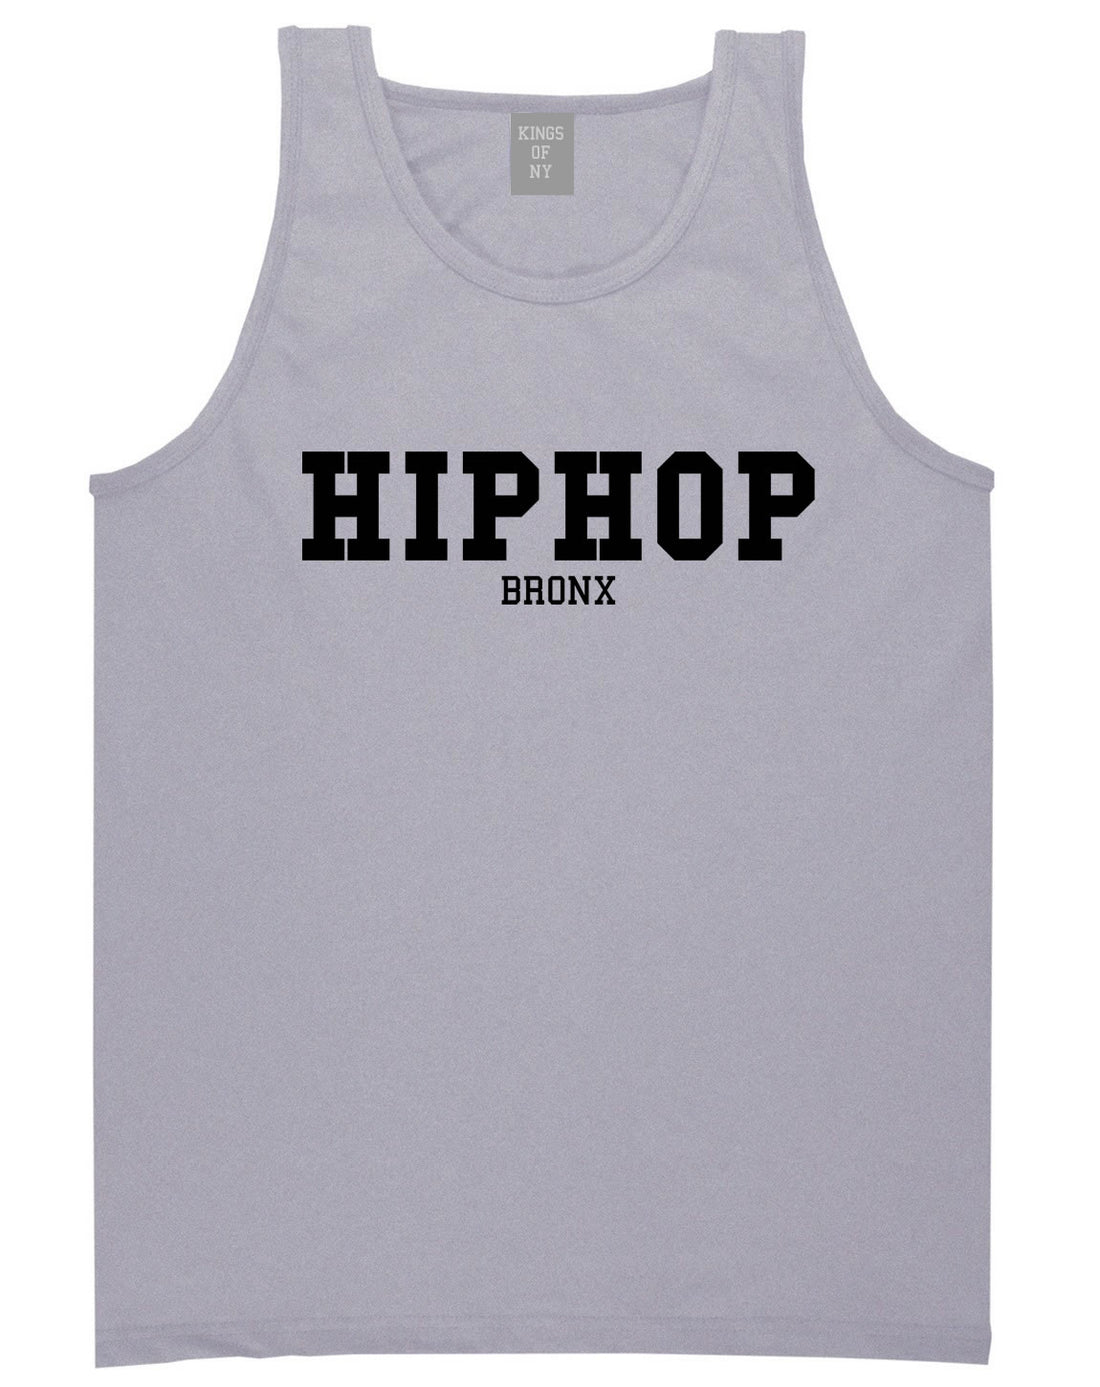 Hiphop the Bronx Tank Top in Grey by Kings Of NY